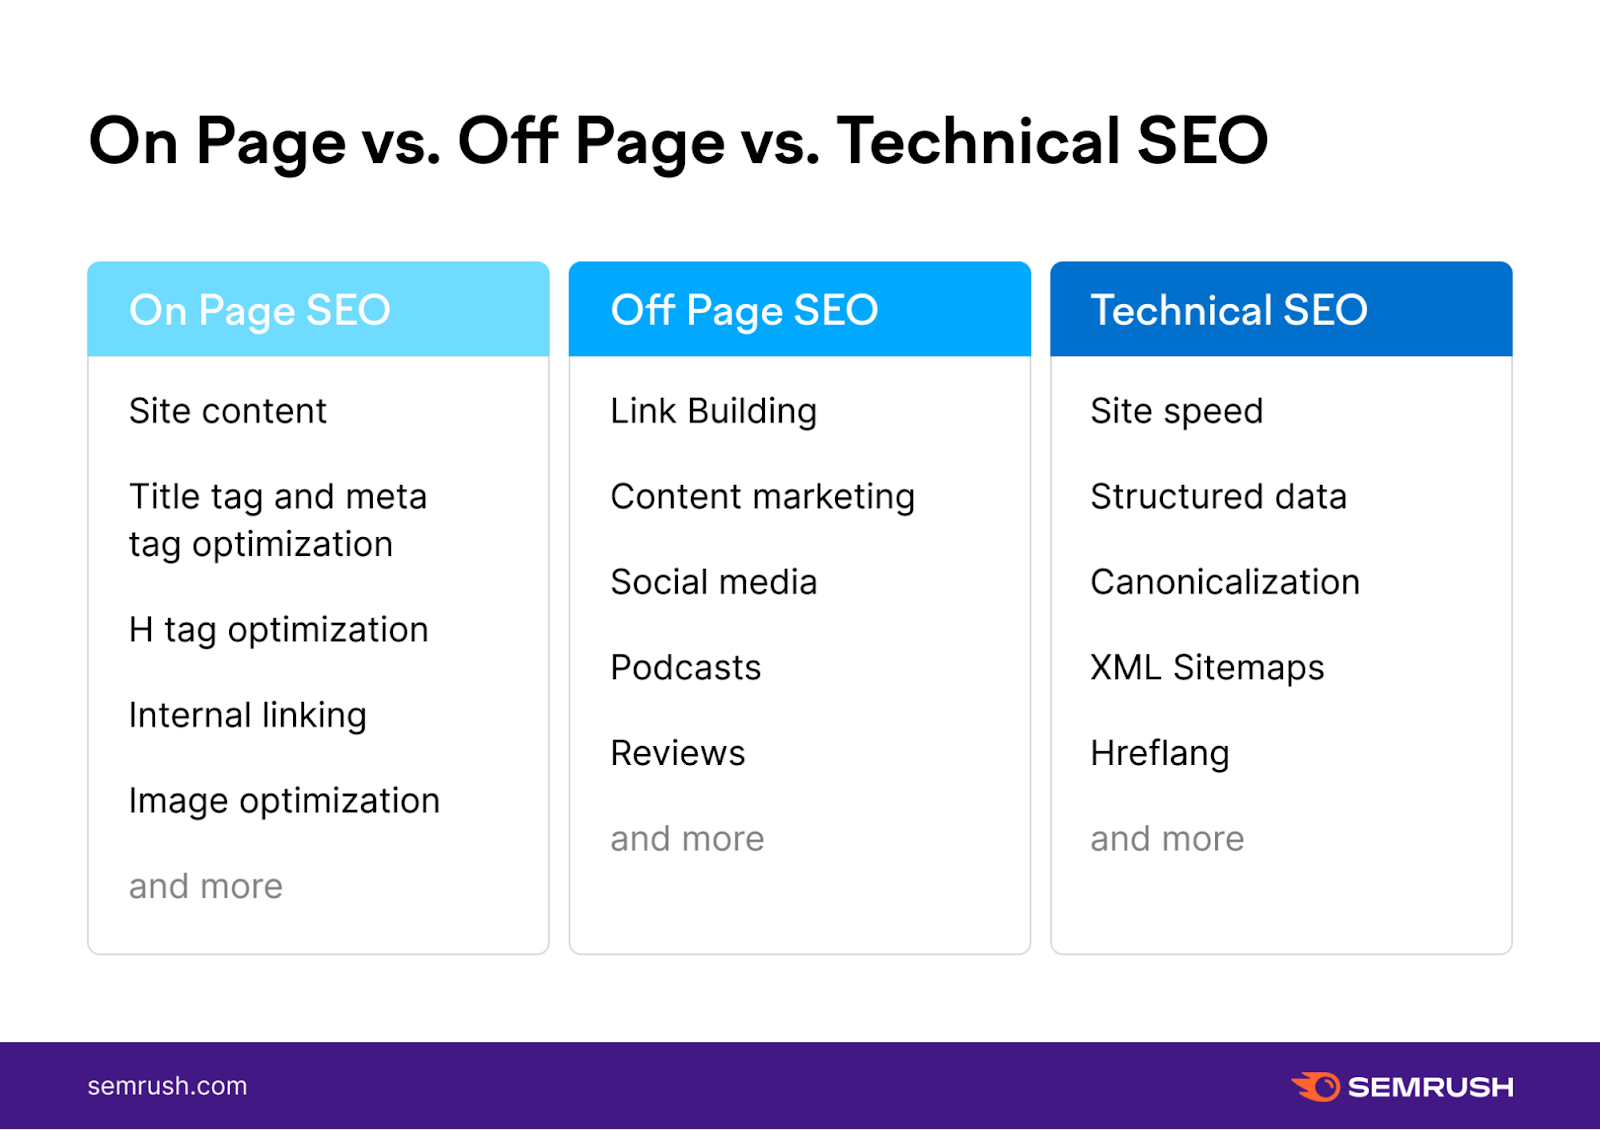 On Page vs. Off Page vs. Technical SEO